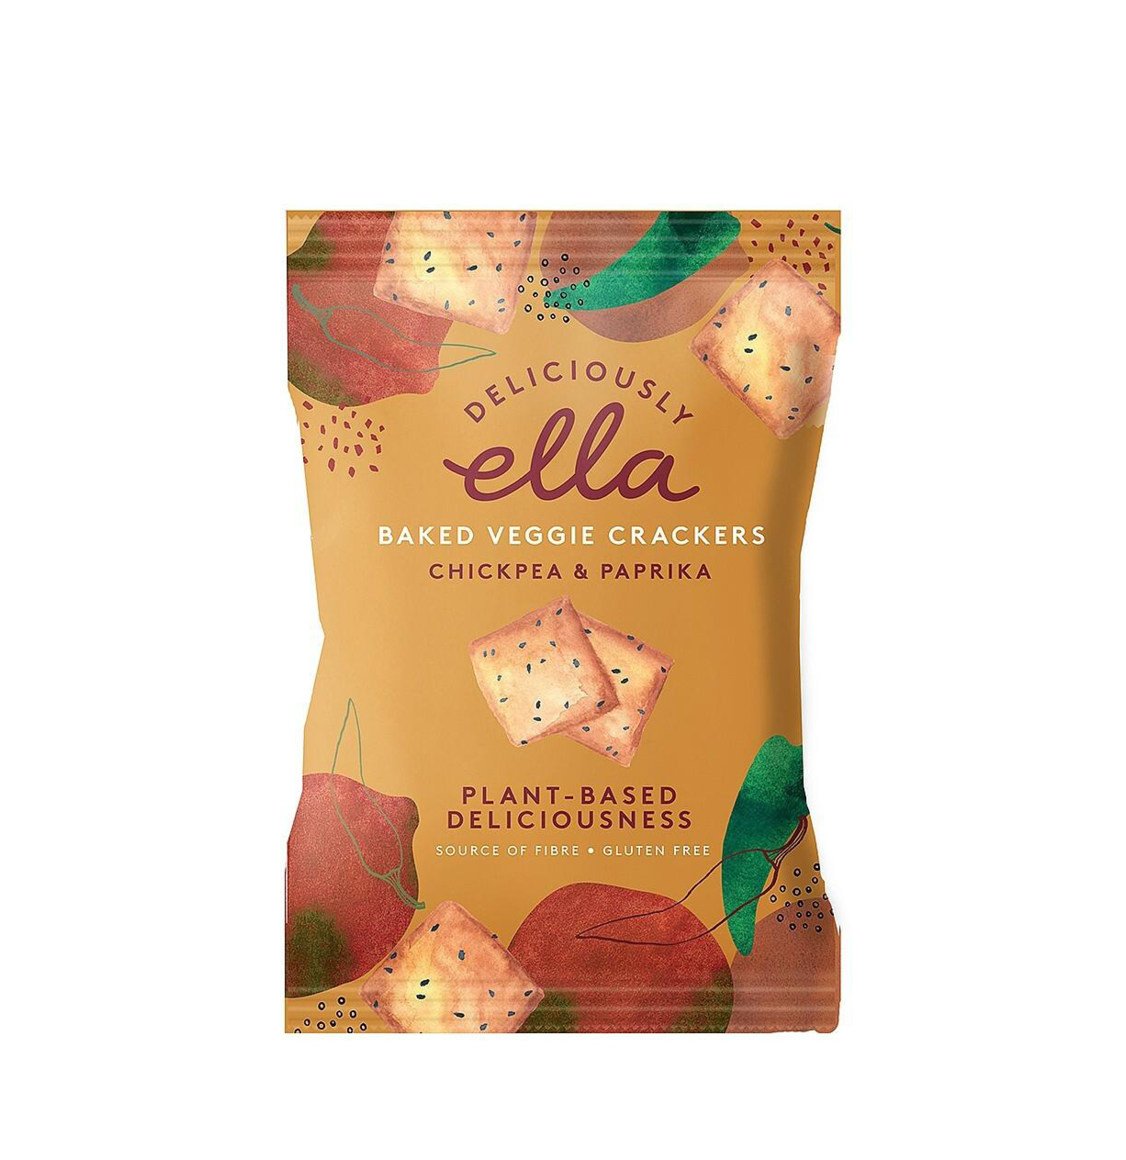 Deliciously Ella Chickpea And Paprika Baked Veggie Crackers 100g